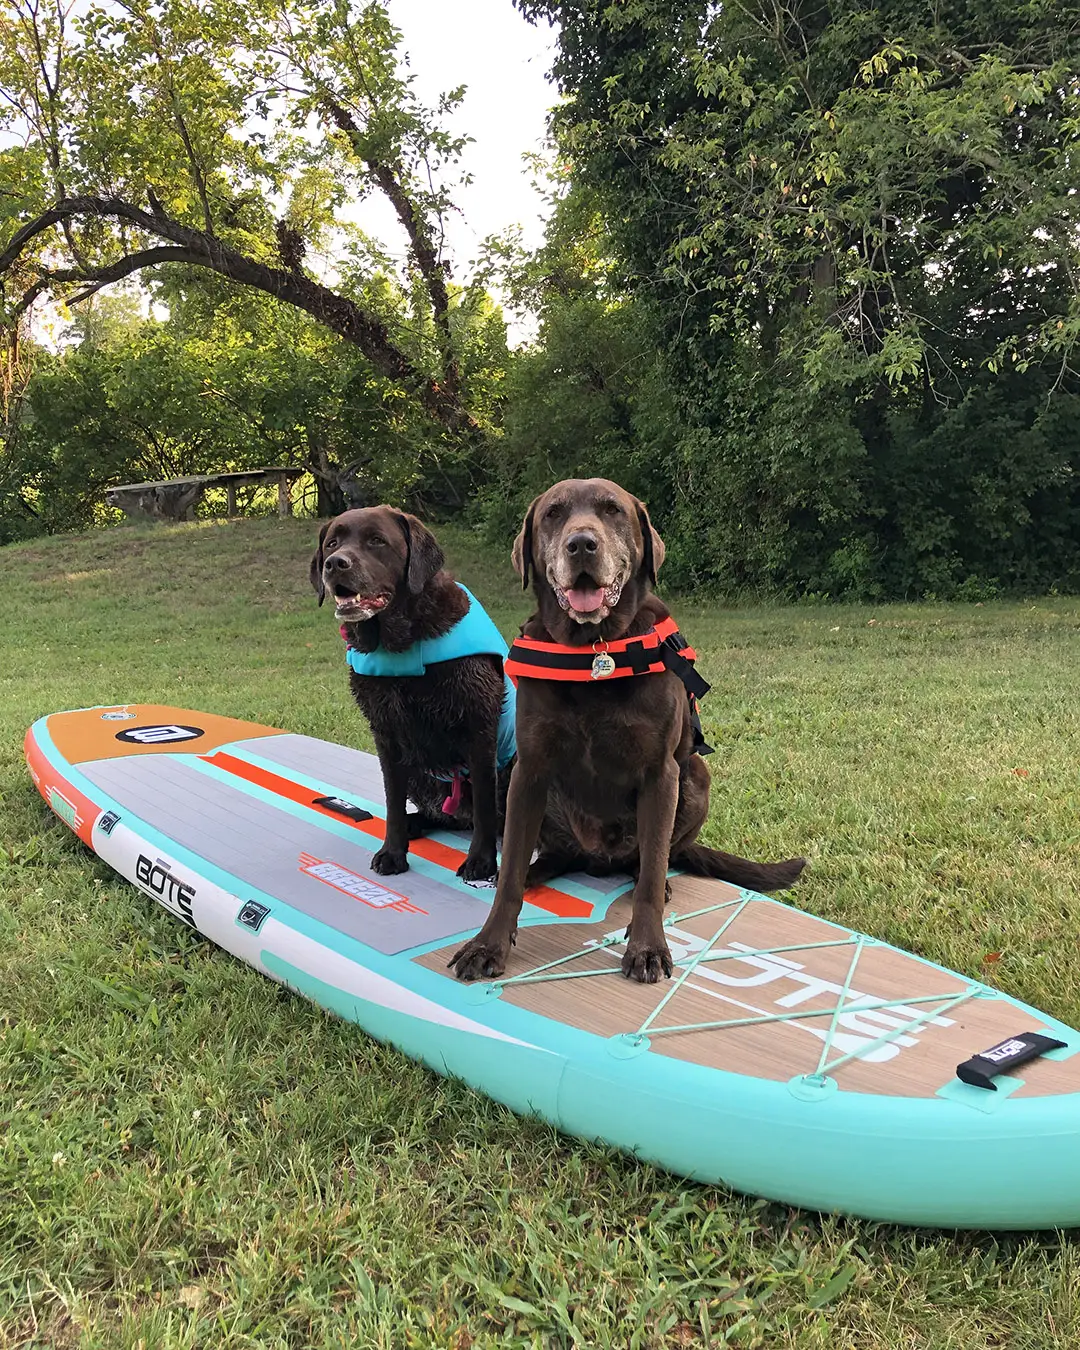 teach your dog to stay on paddleboard